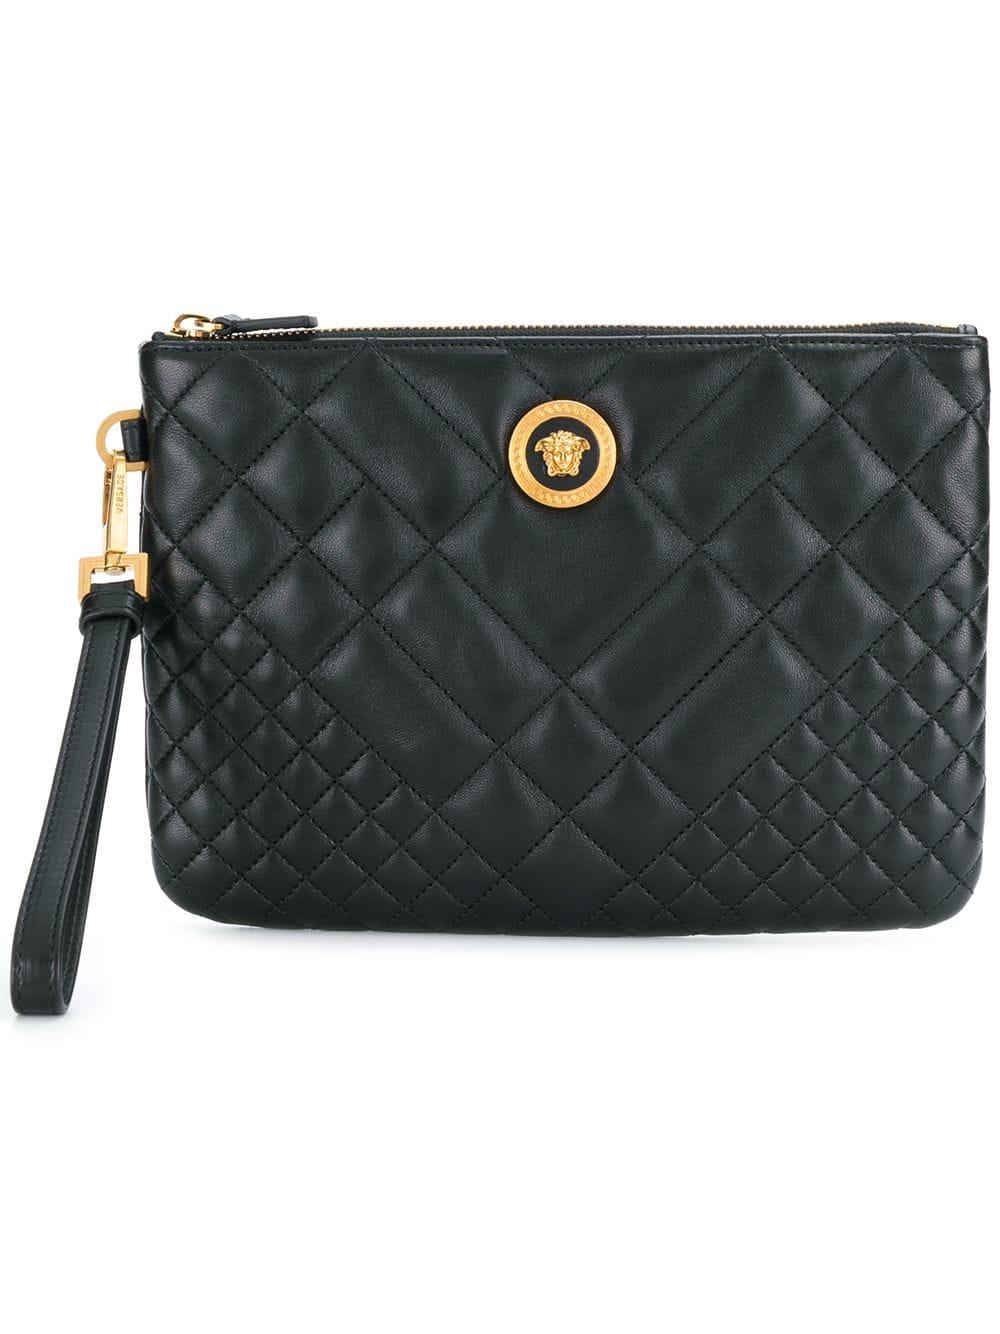 Versace Leather Quilted Medusa Clutch in Black - Lyst